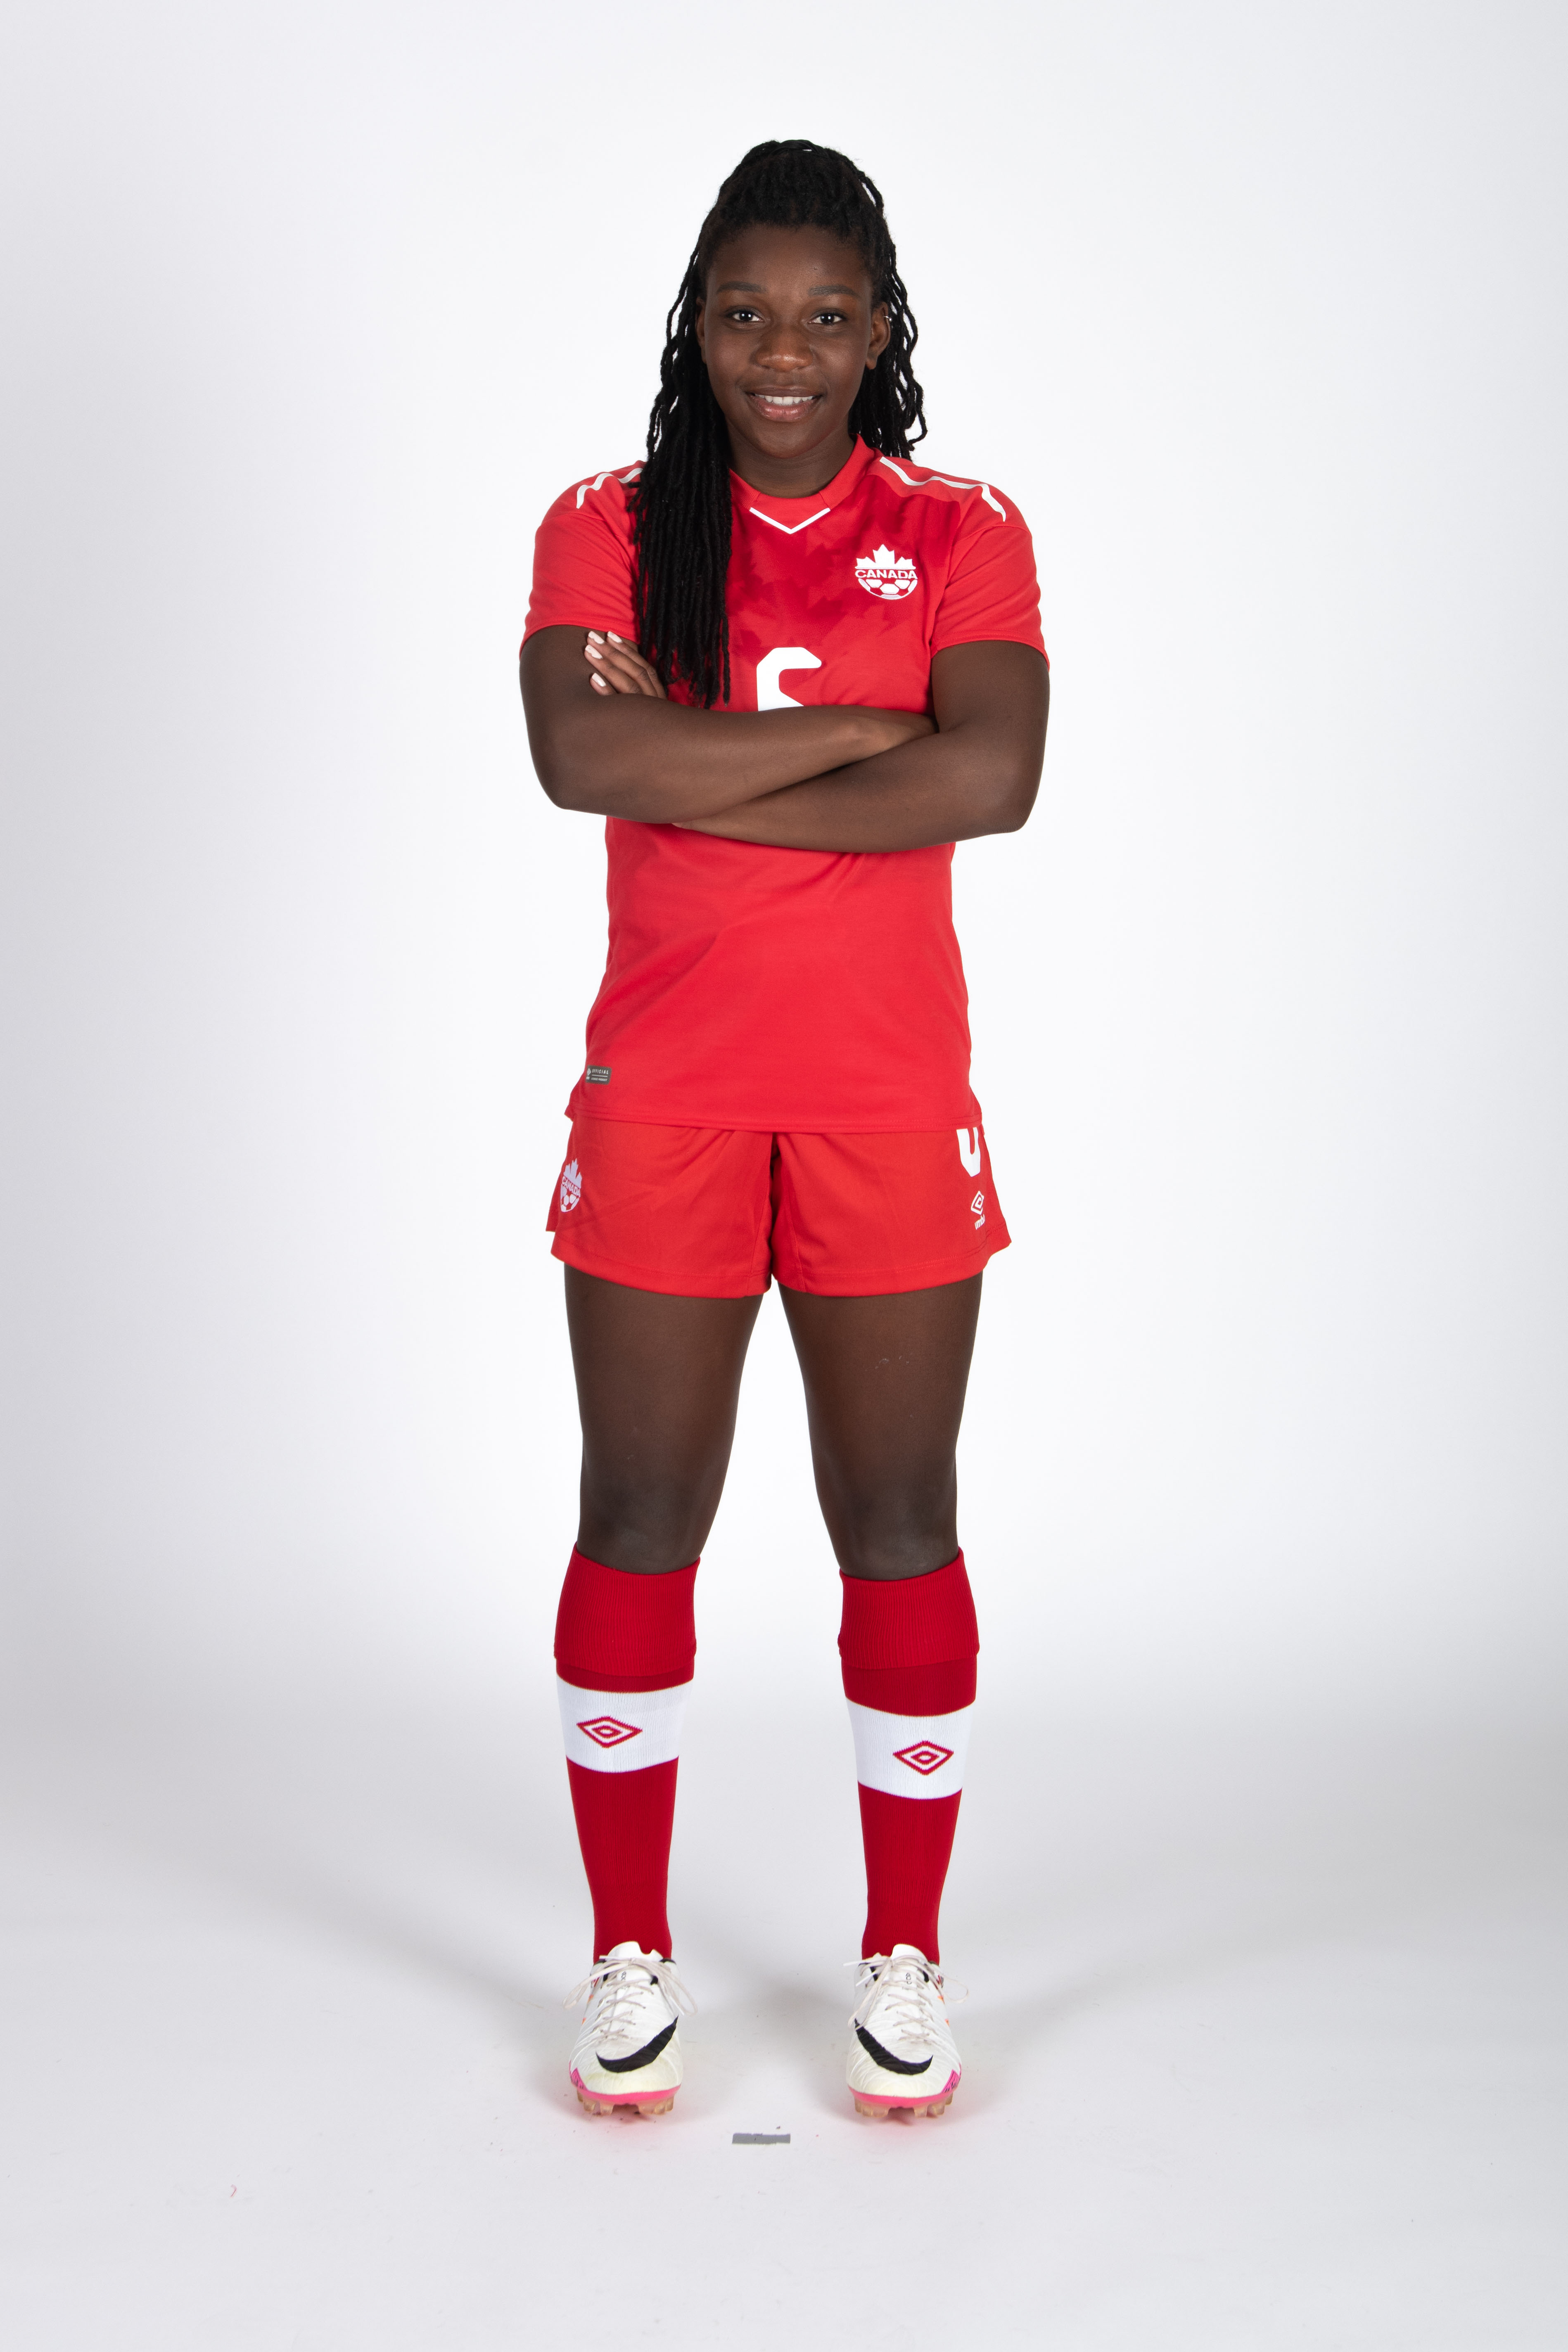 20180604_CANWNT_Rose_byBazyl05